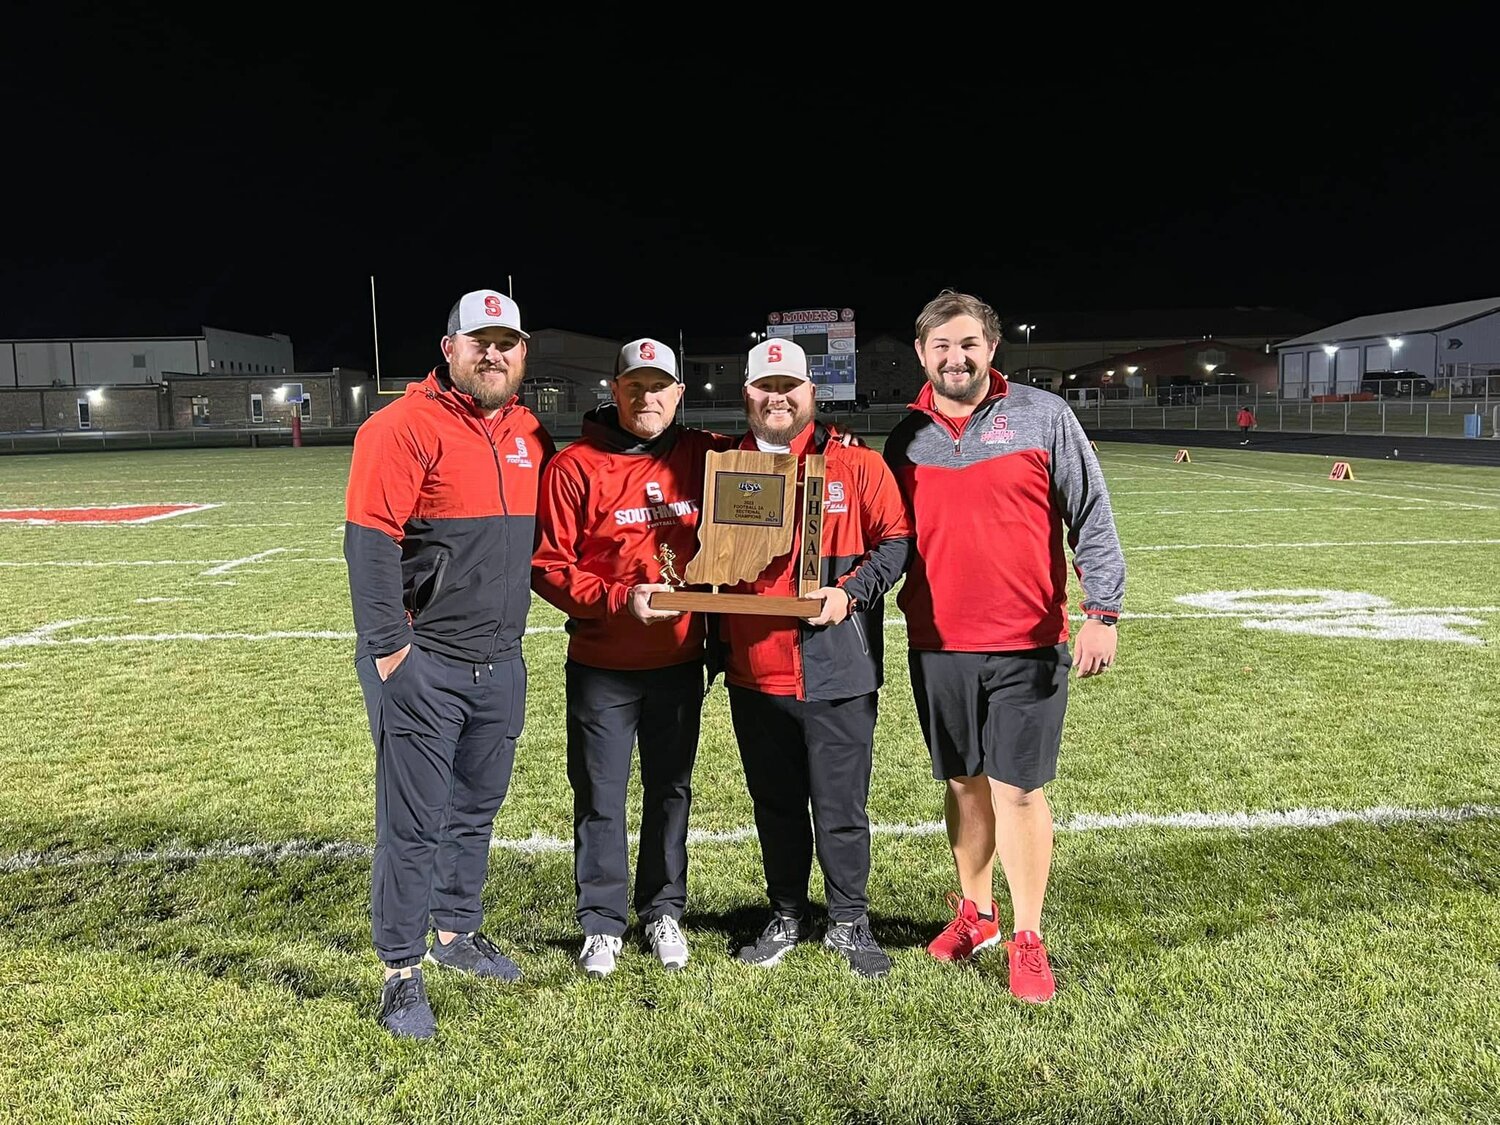 Southmont coach Baylee Adams (far left) went from nearly winning a sectional title with North Montgomery in 2015 to now helping Southmont to their first sectional title in school history.